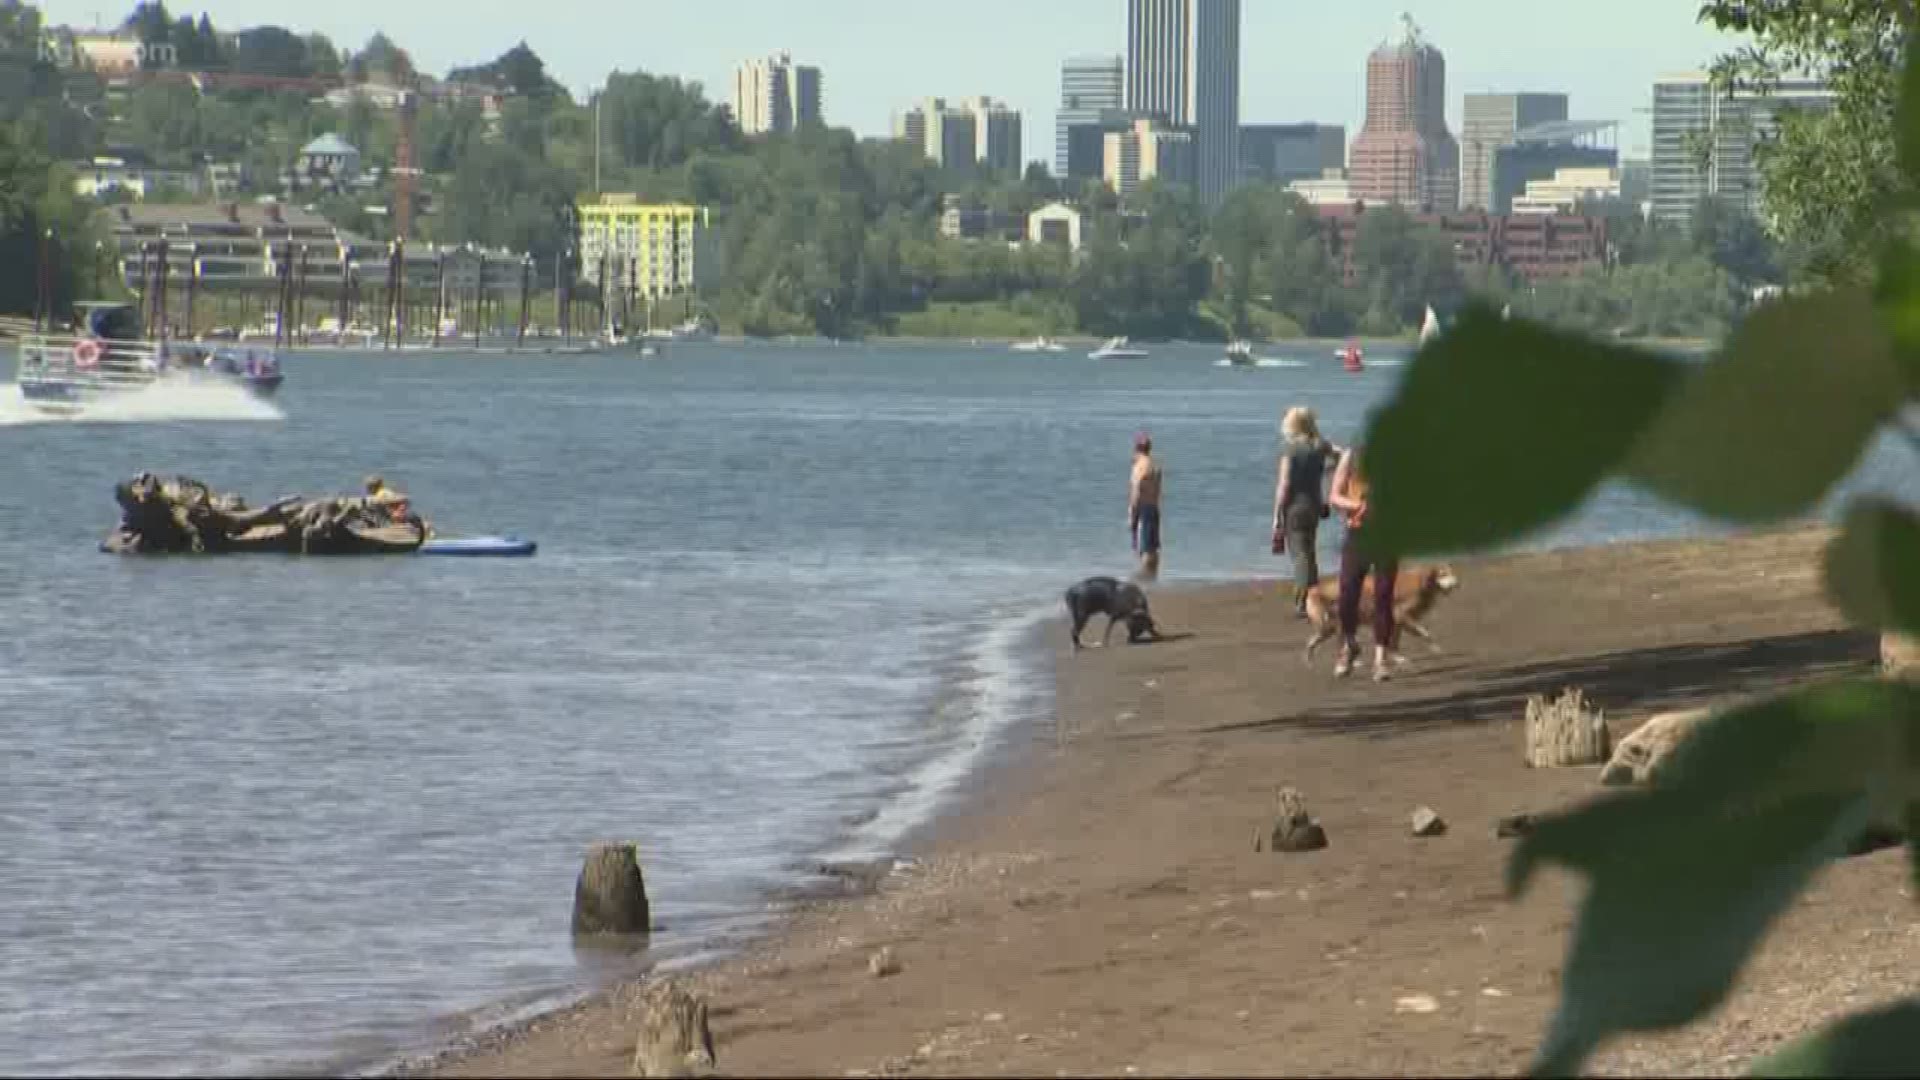 The Willamette River is ranked the 5th most endangered river.